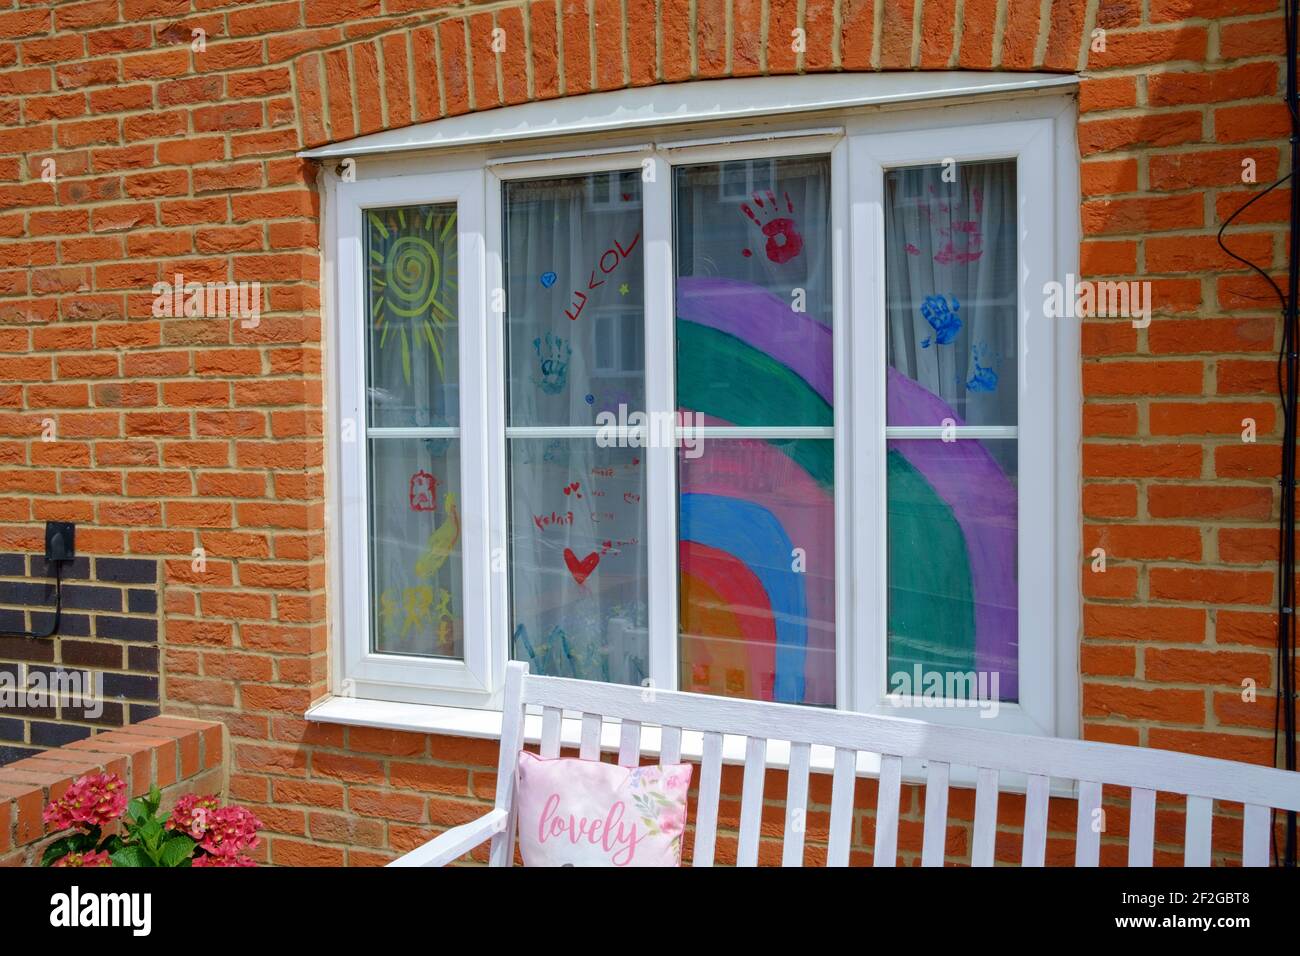 NHS Rainbows placed in windows to thank the NHS during the Covid-19 Pandemic Stock Photo